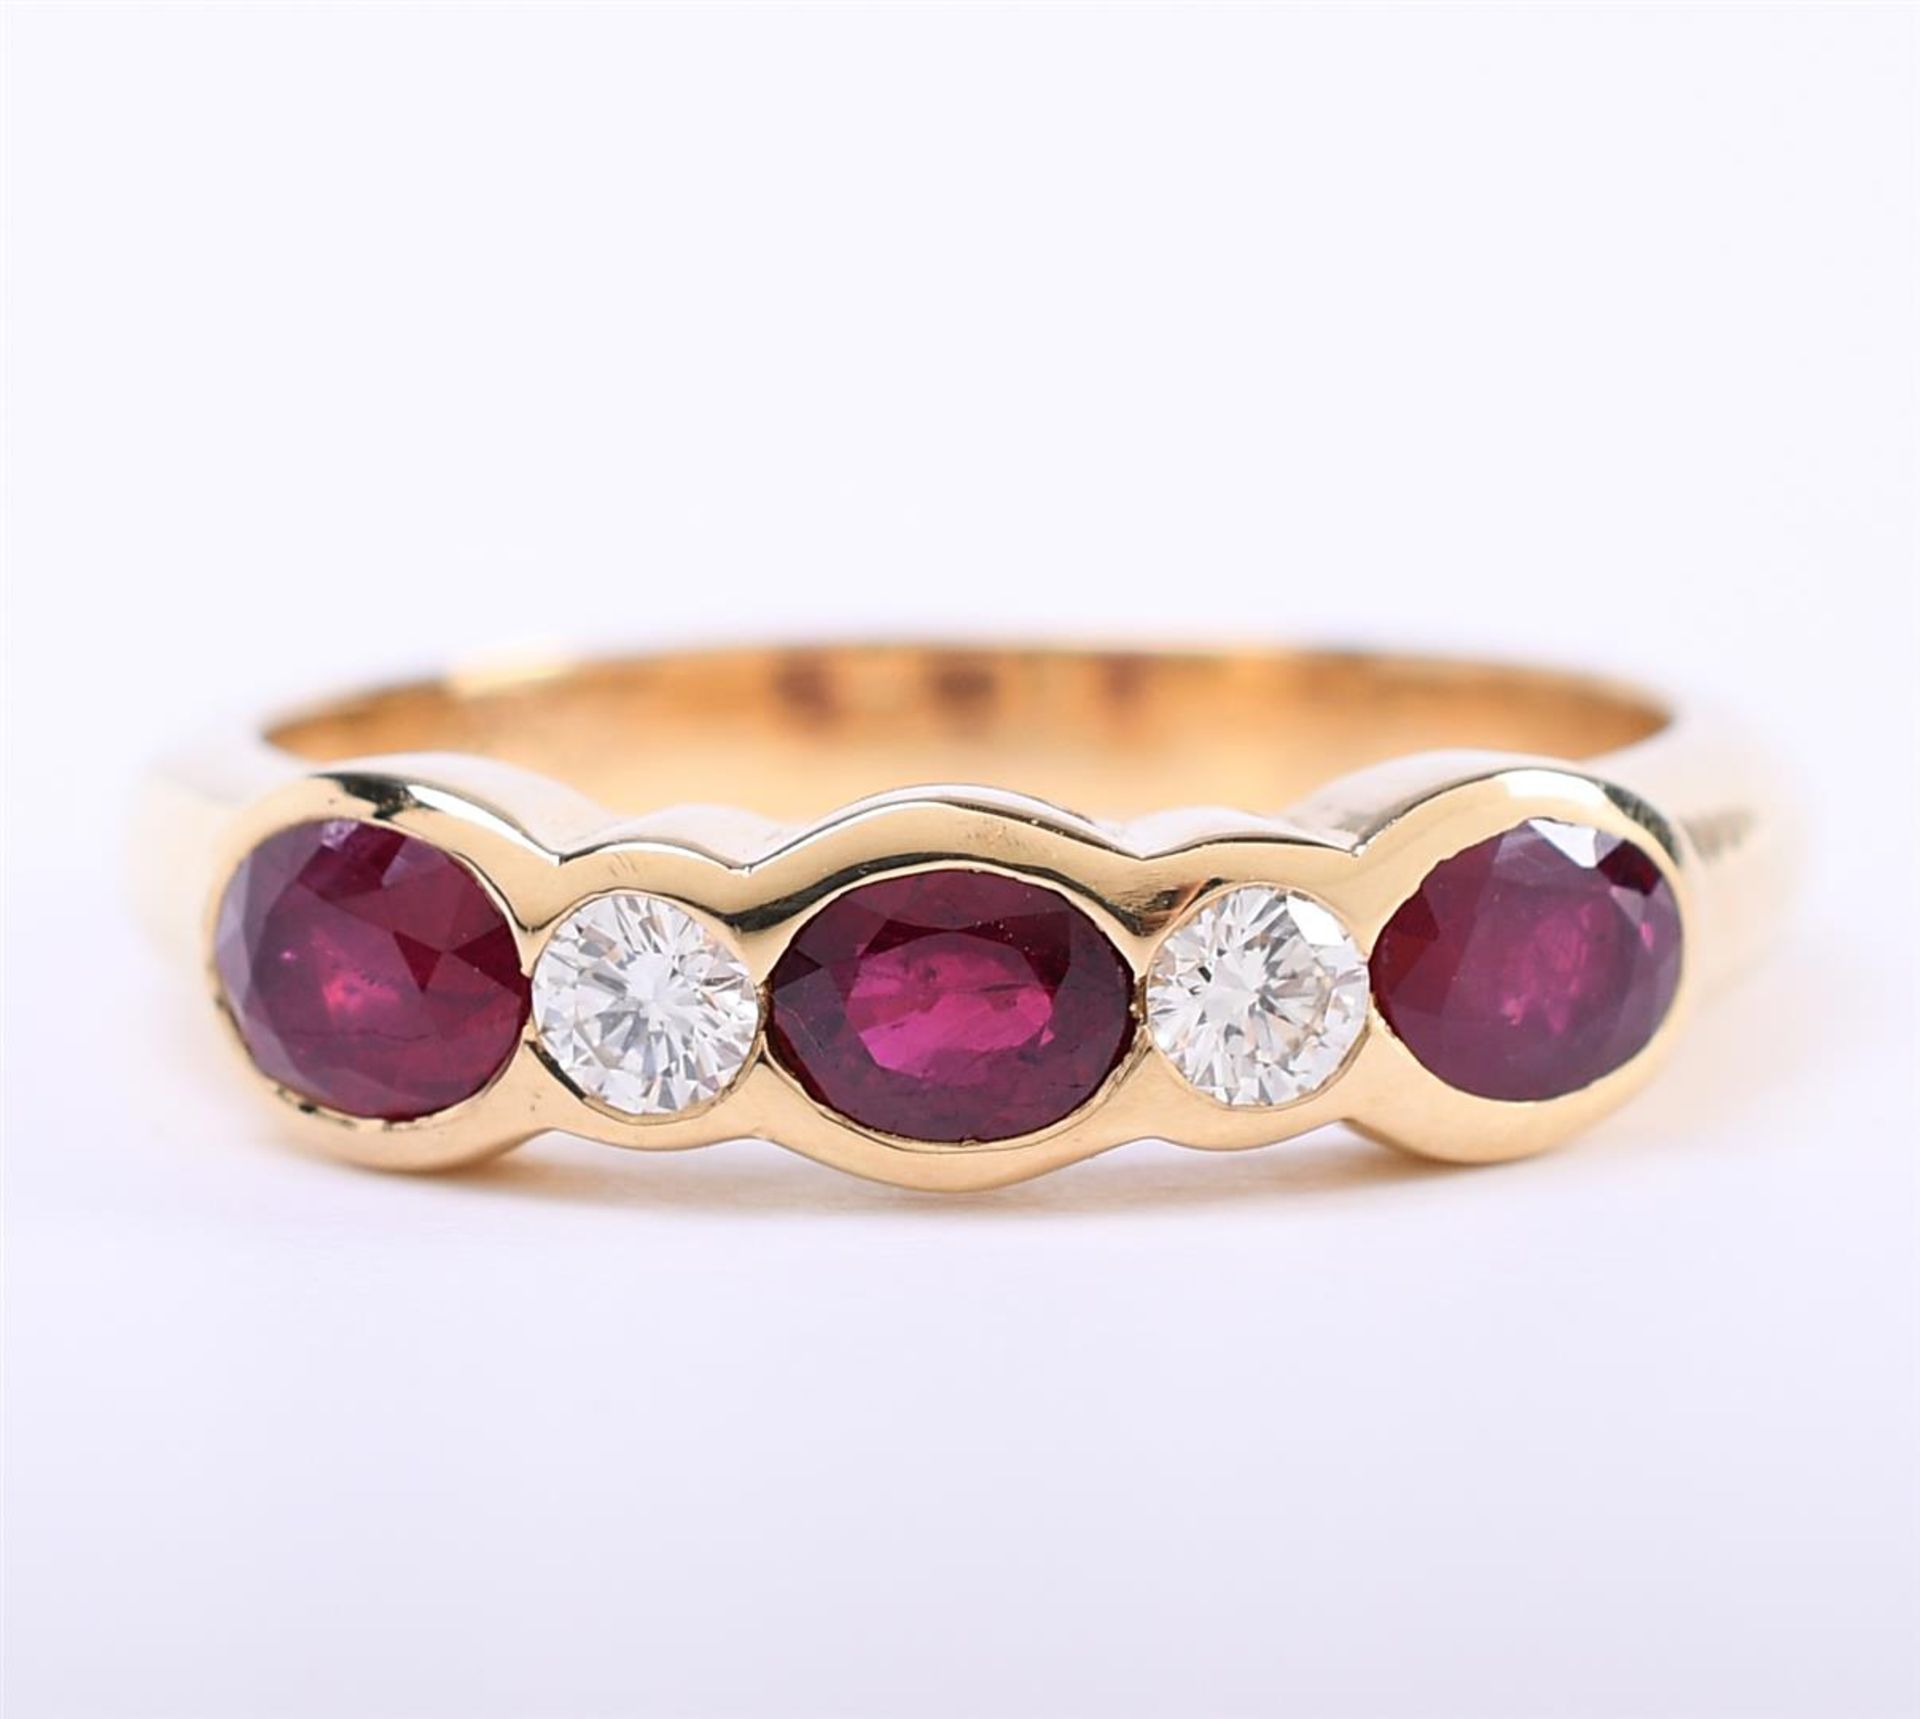 18 carat yellow gold ladies ring set with approximately 3 x oval cut rubies